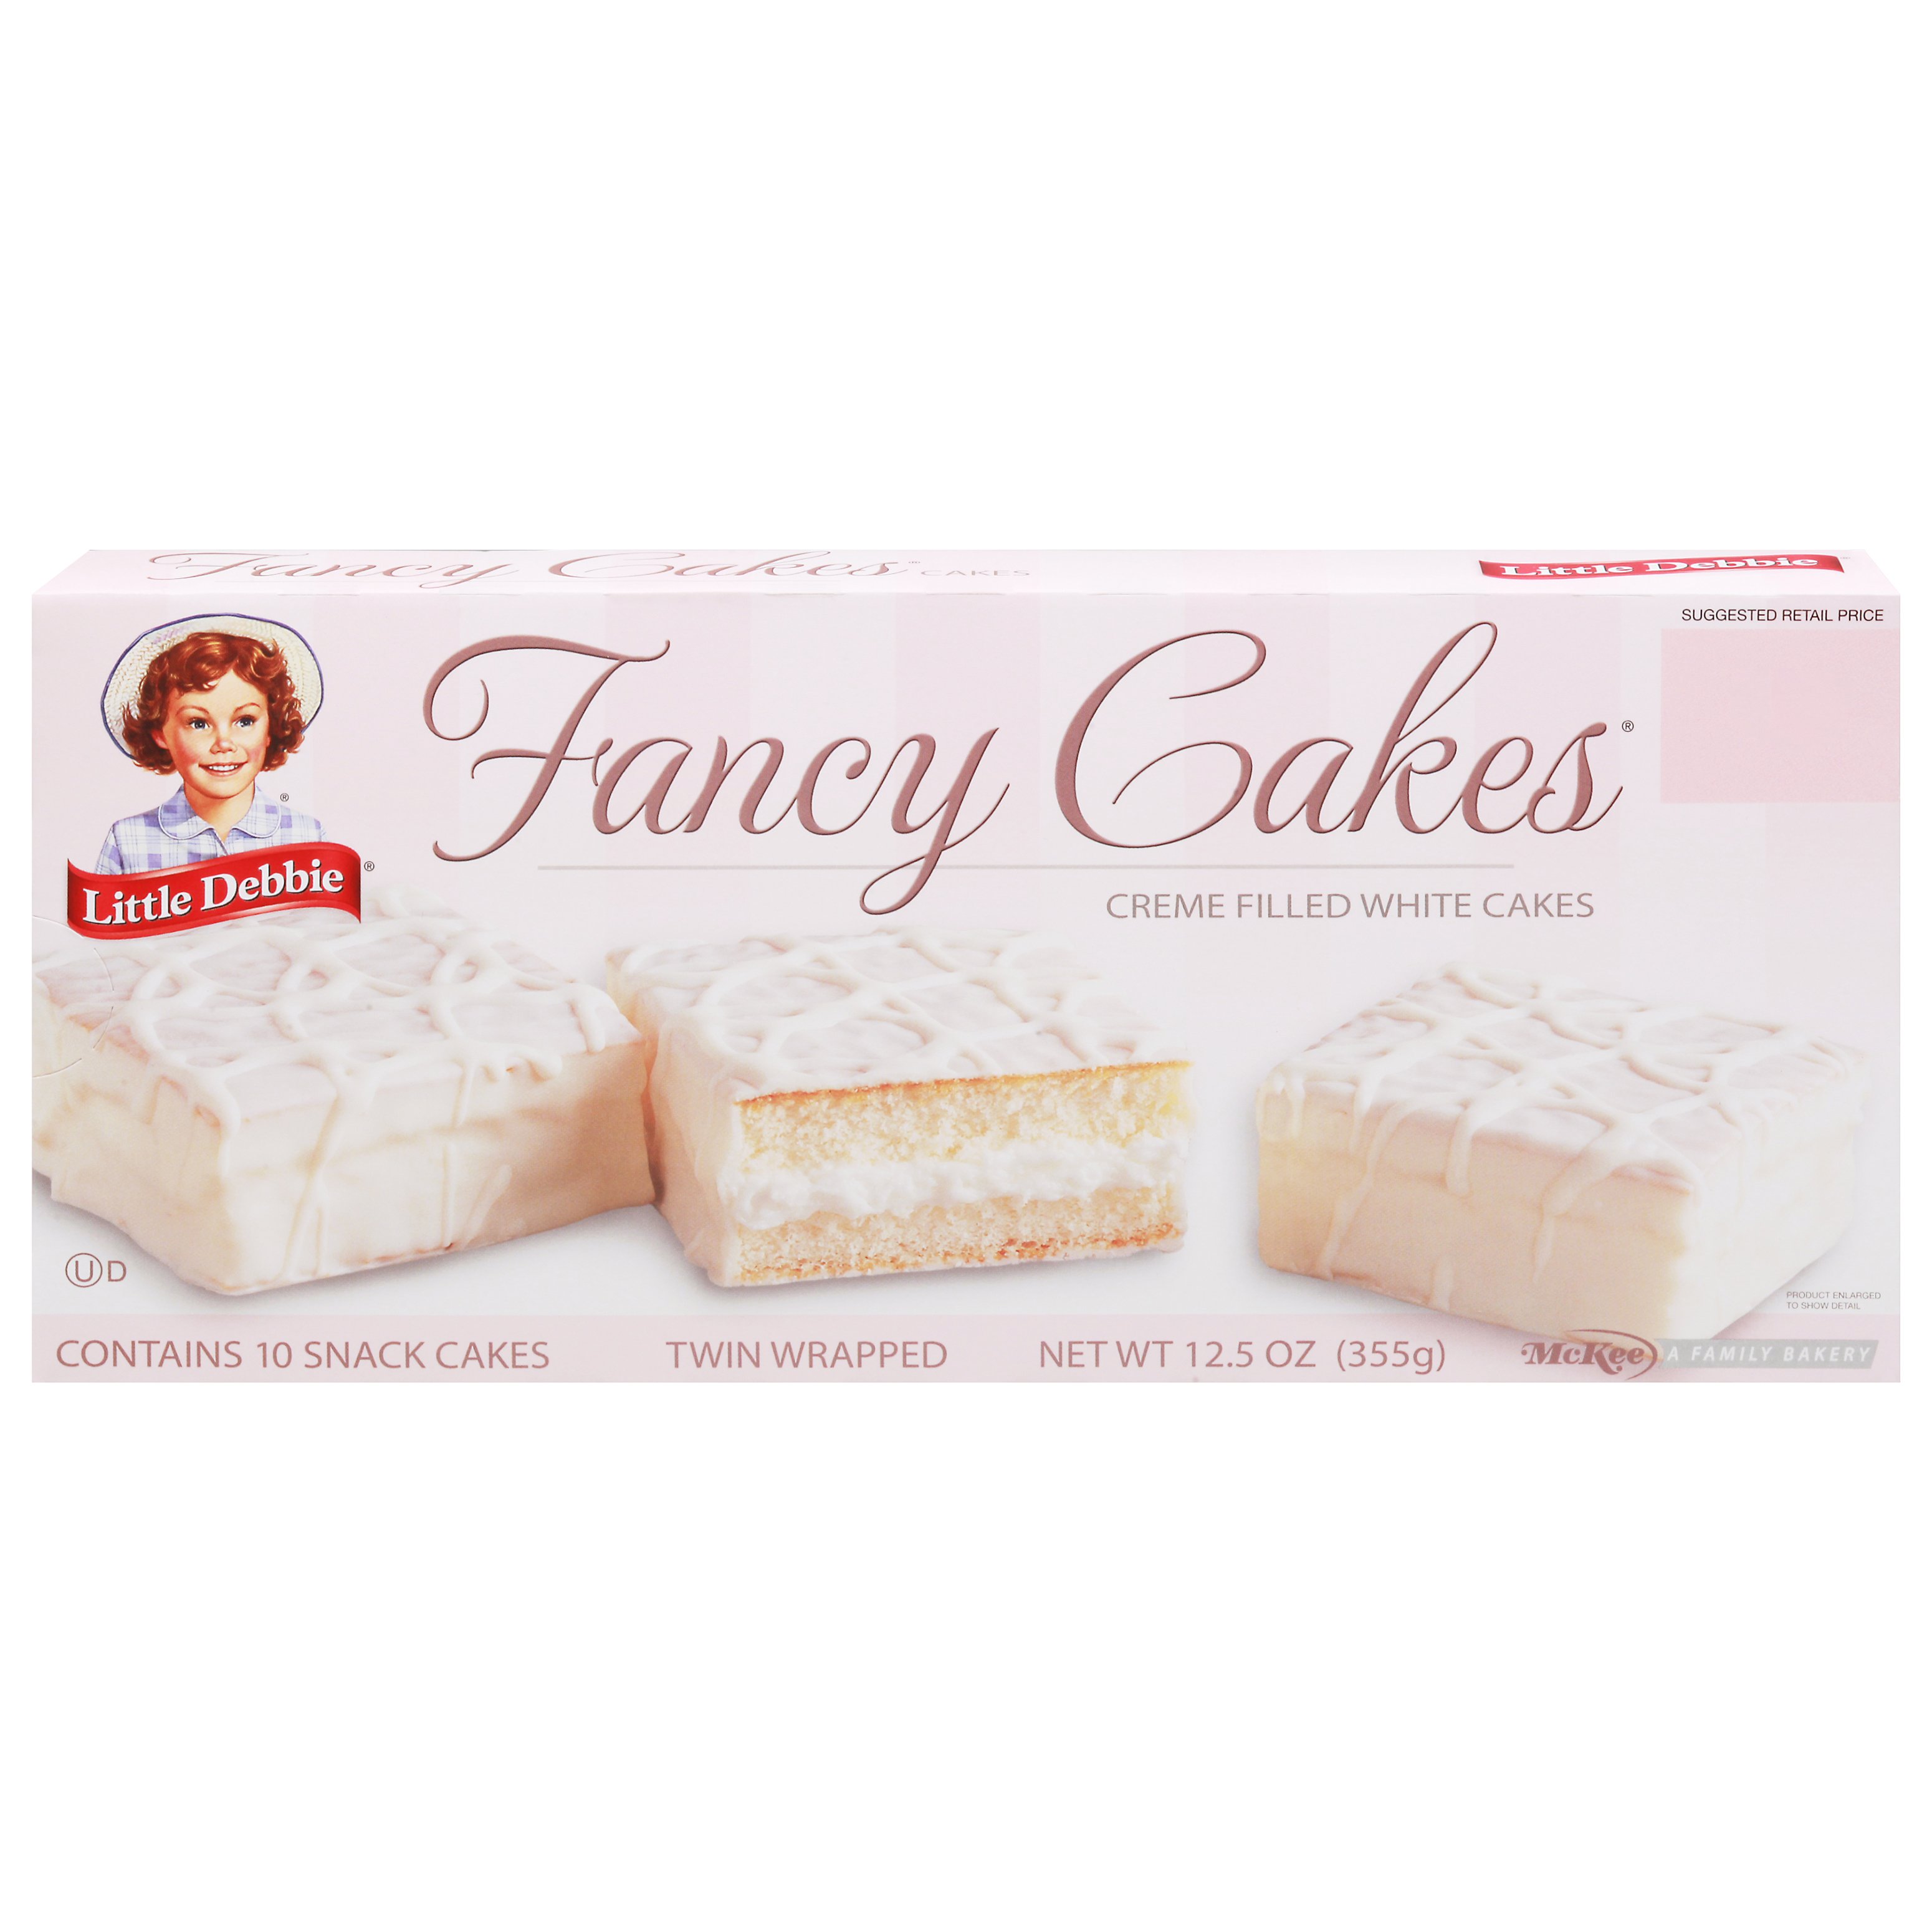 Little Debbie Fancy Cakes, Twin Wrapped - Shop Snack Cakes at H-E-B